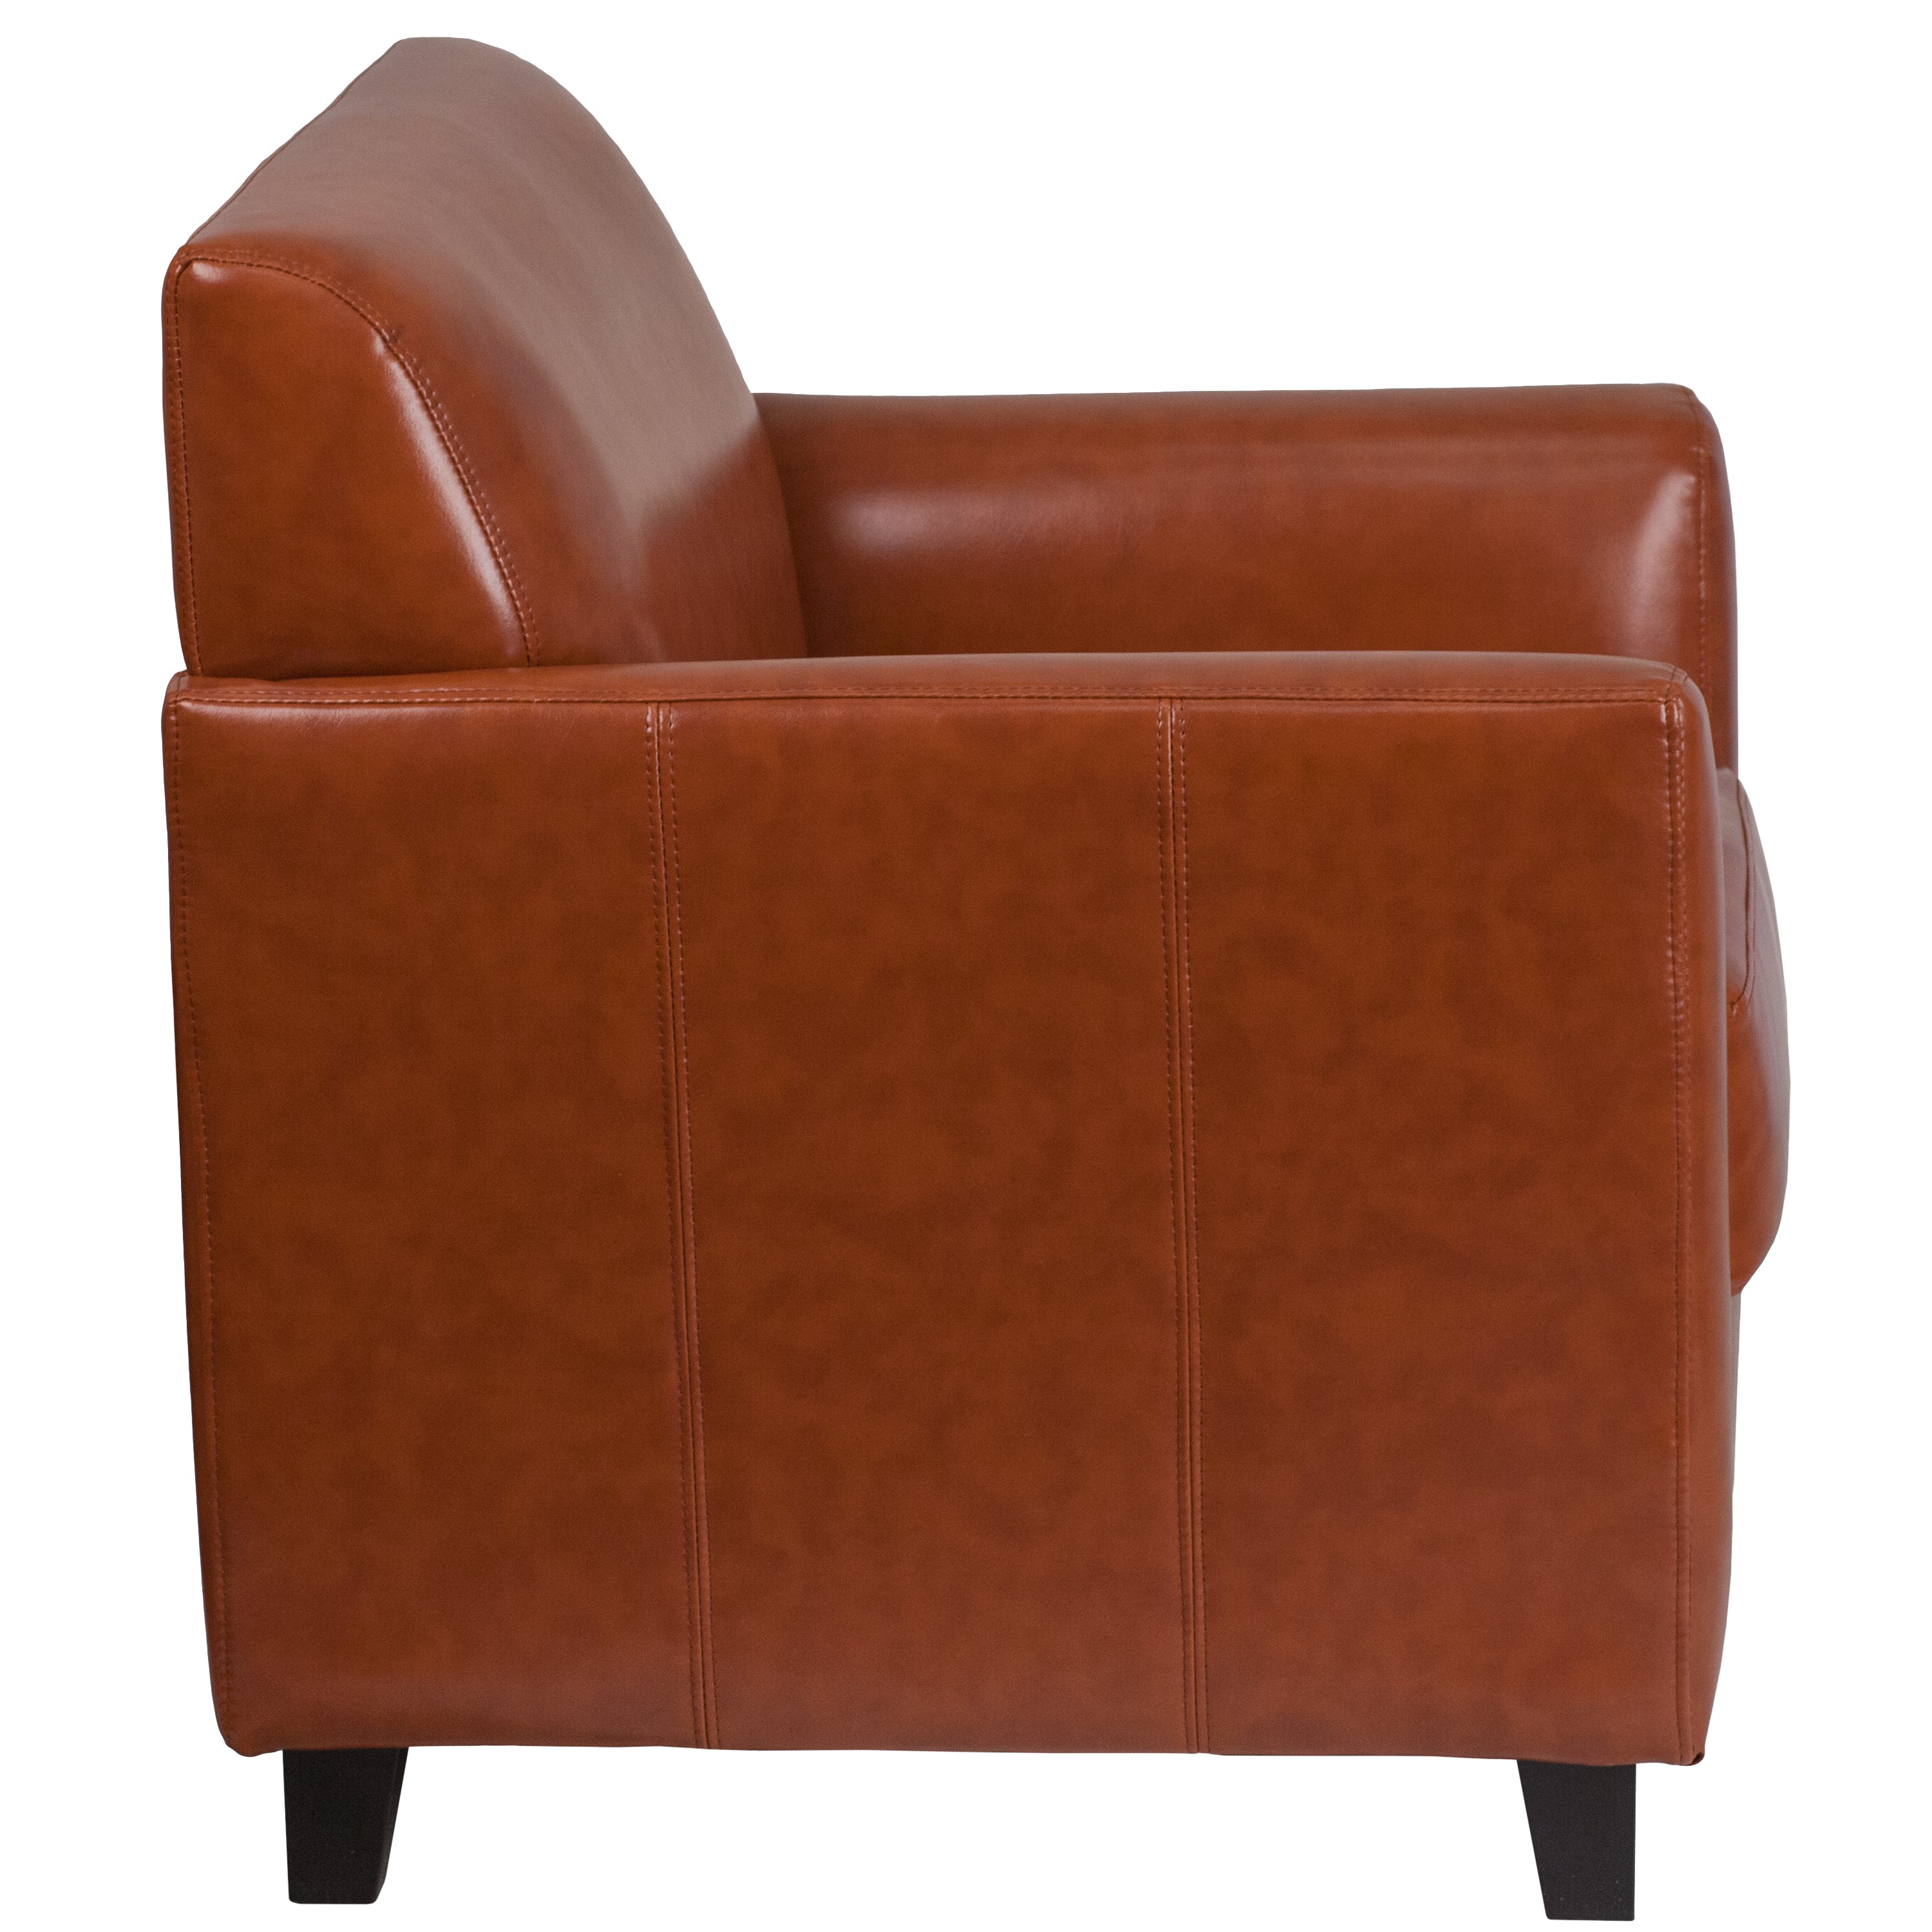 HERCULES Diplomat Series LeatherSoft Chair with Clean Line Stitched Frame-Reception Chair-Flash Furniture-Wall2Wall Furnishings